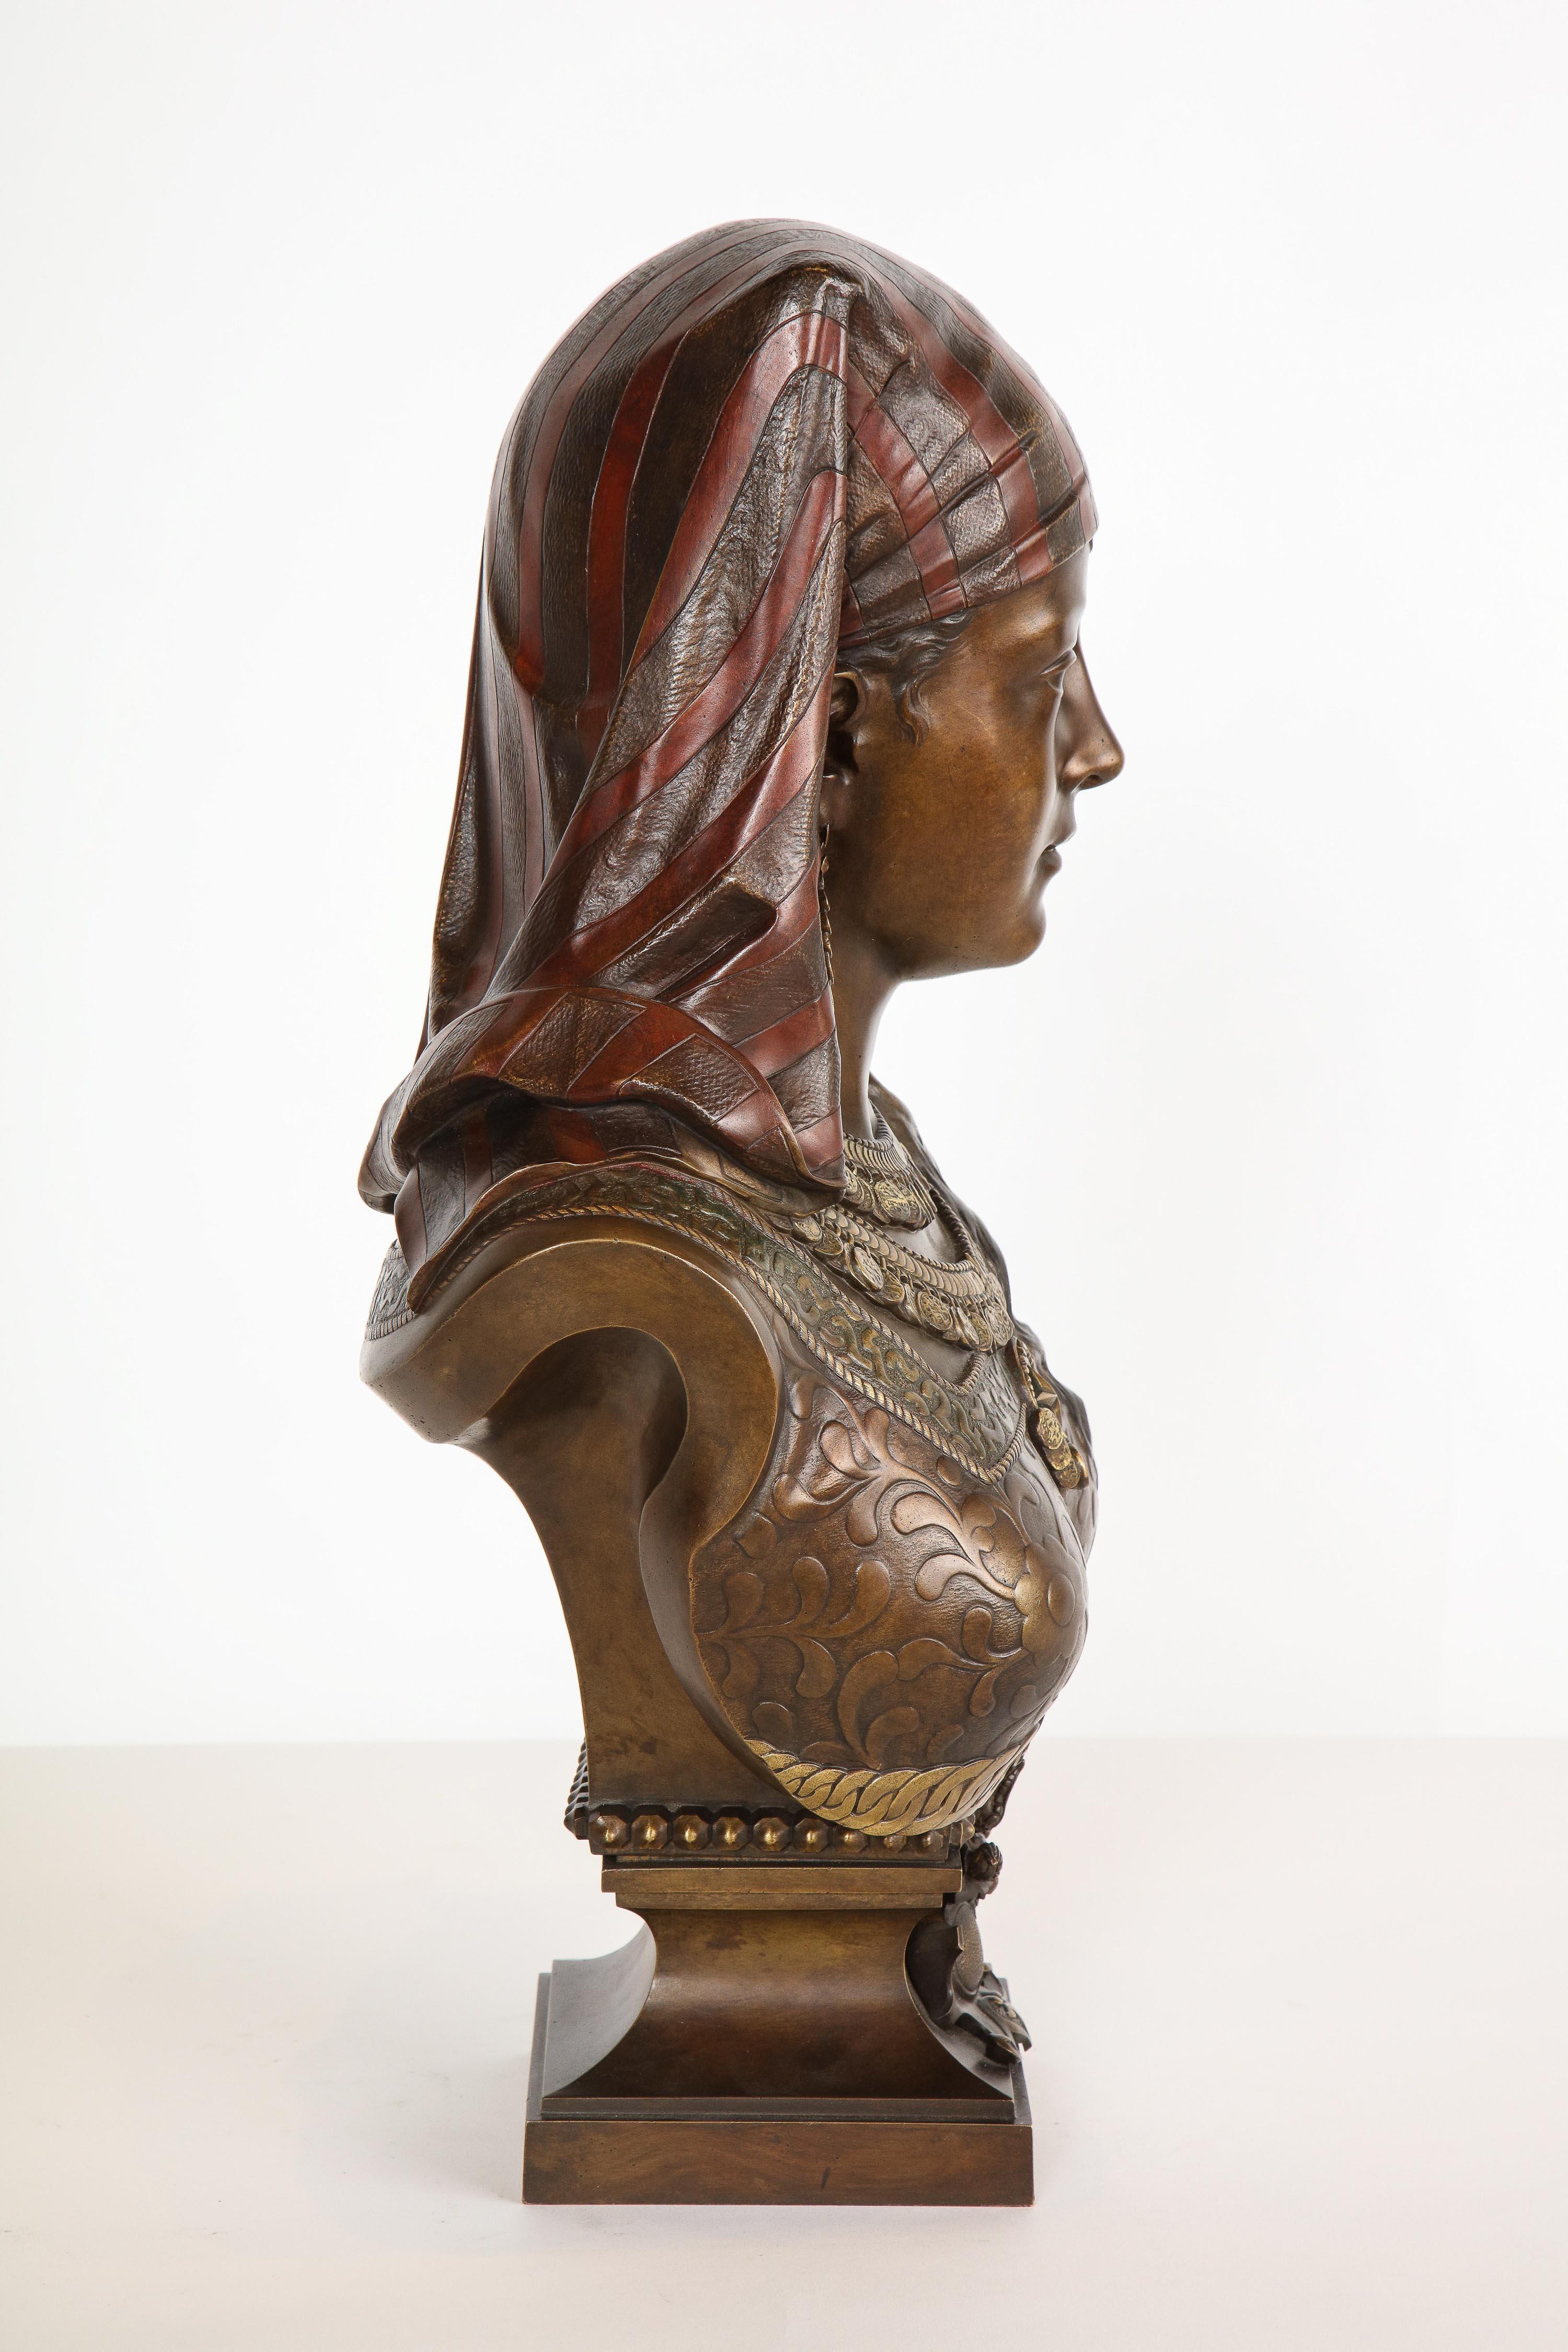 Exquisite French Multi-Patinated Orientalist Bronze Bust of Saida, by Rimbez 6